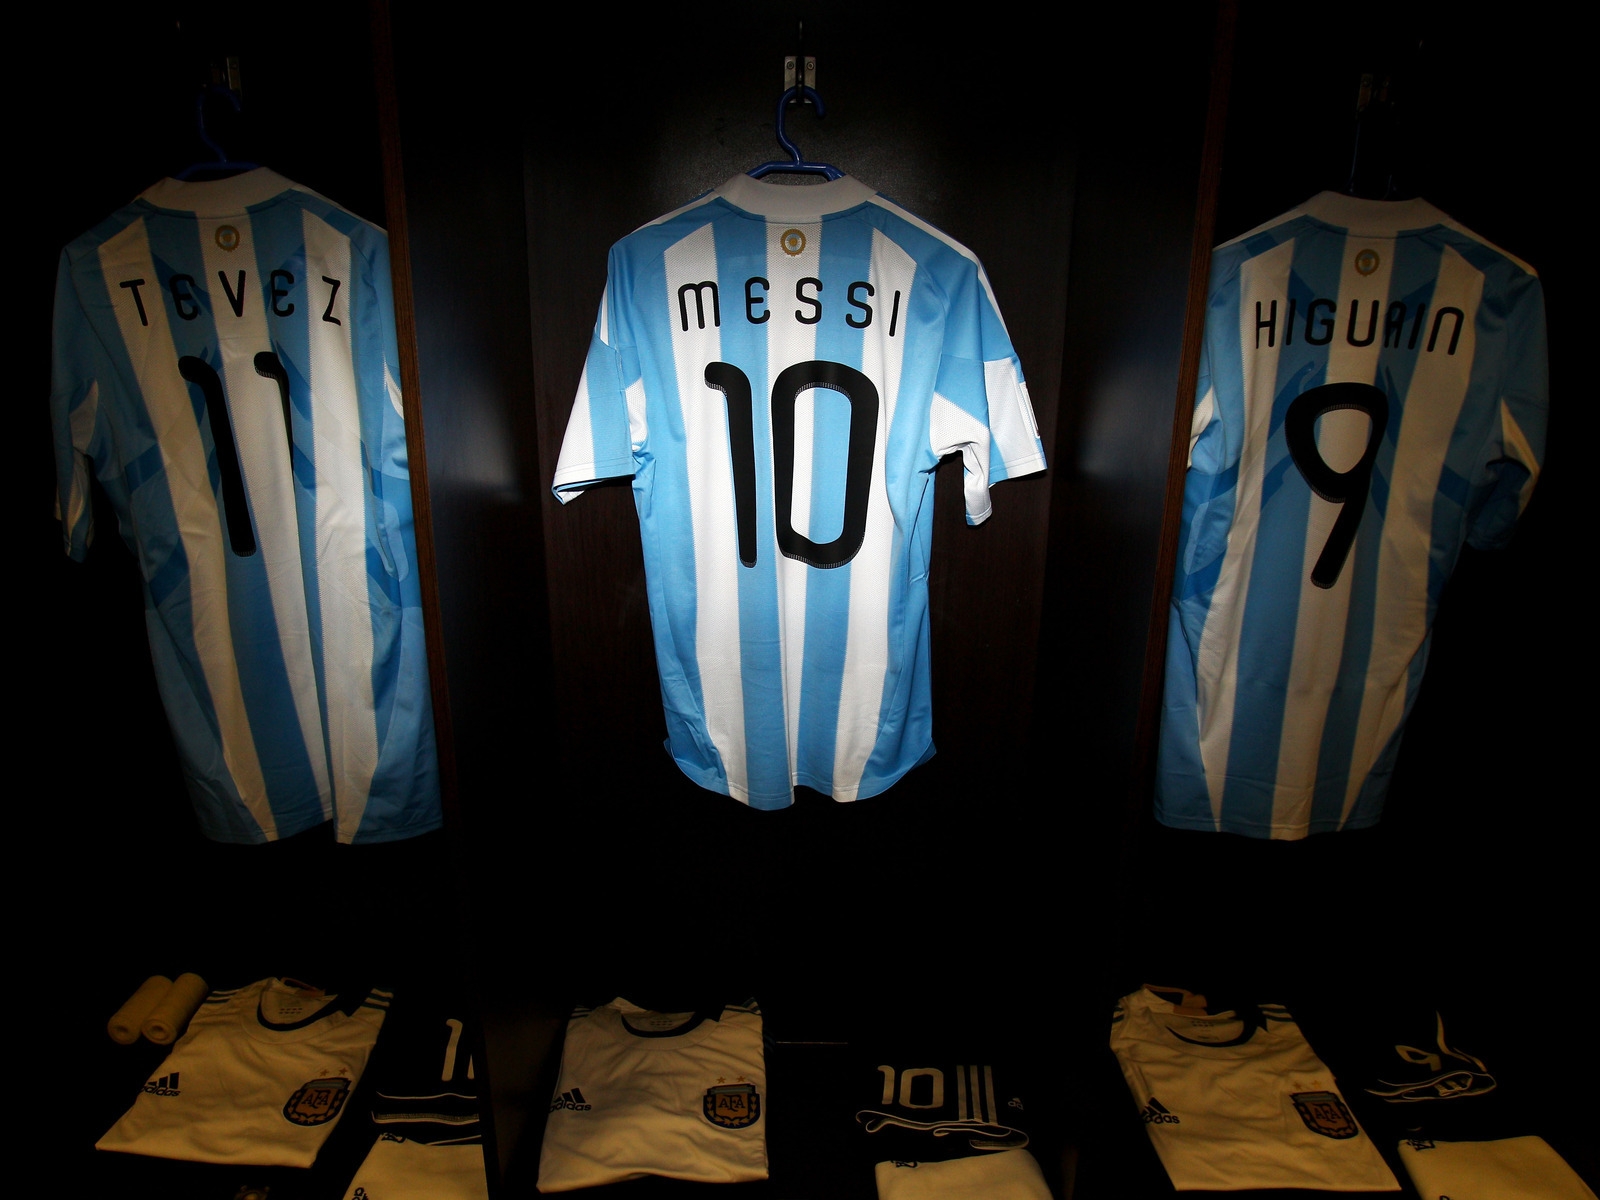 Tshirt of Messi, Tevez and Higuain for 1600 x 1200 resolution